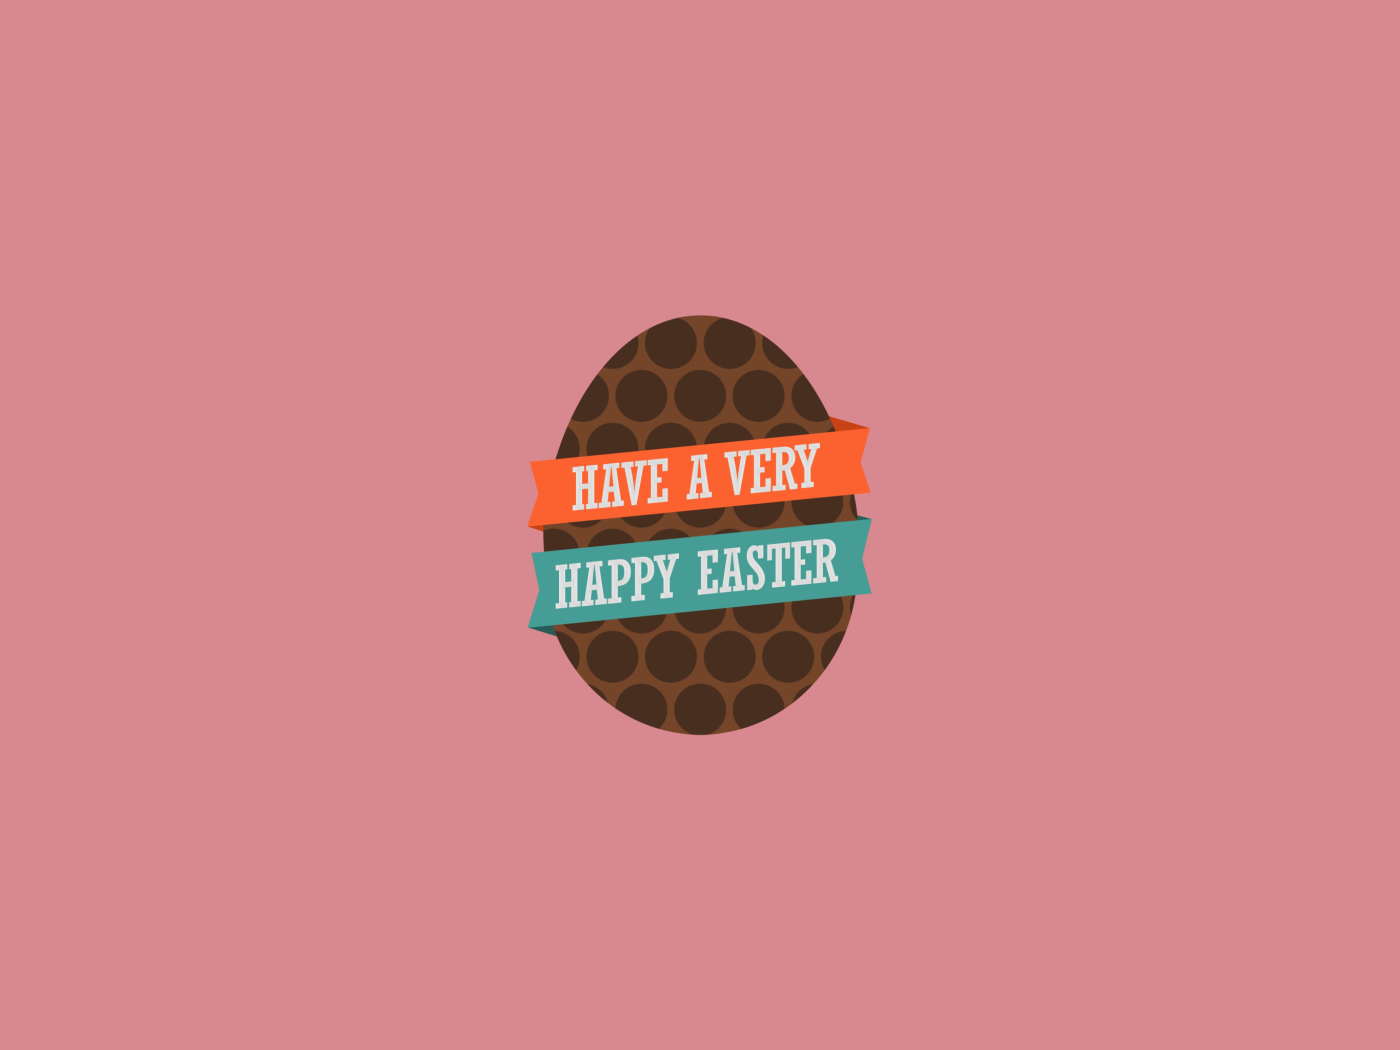 Very Happy Easter Egg wallpaper 1400x1050